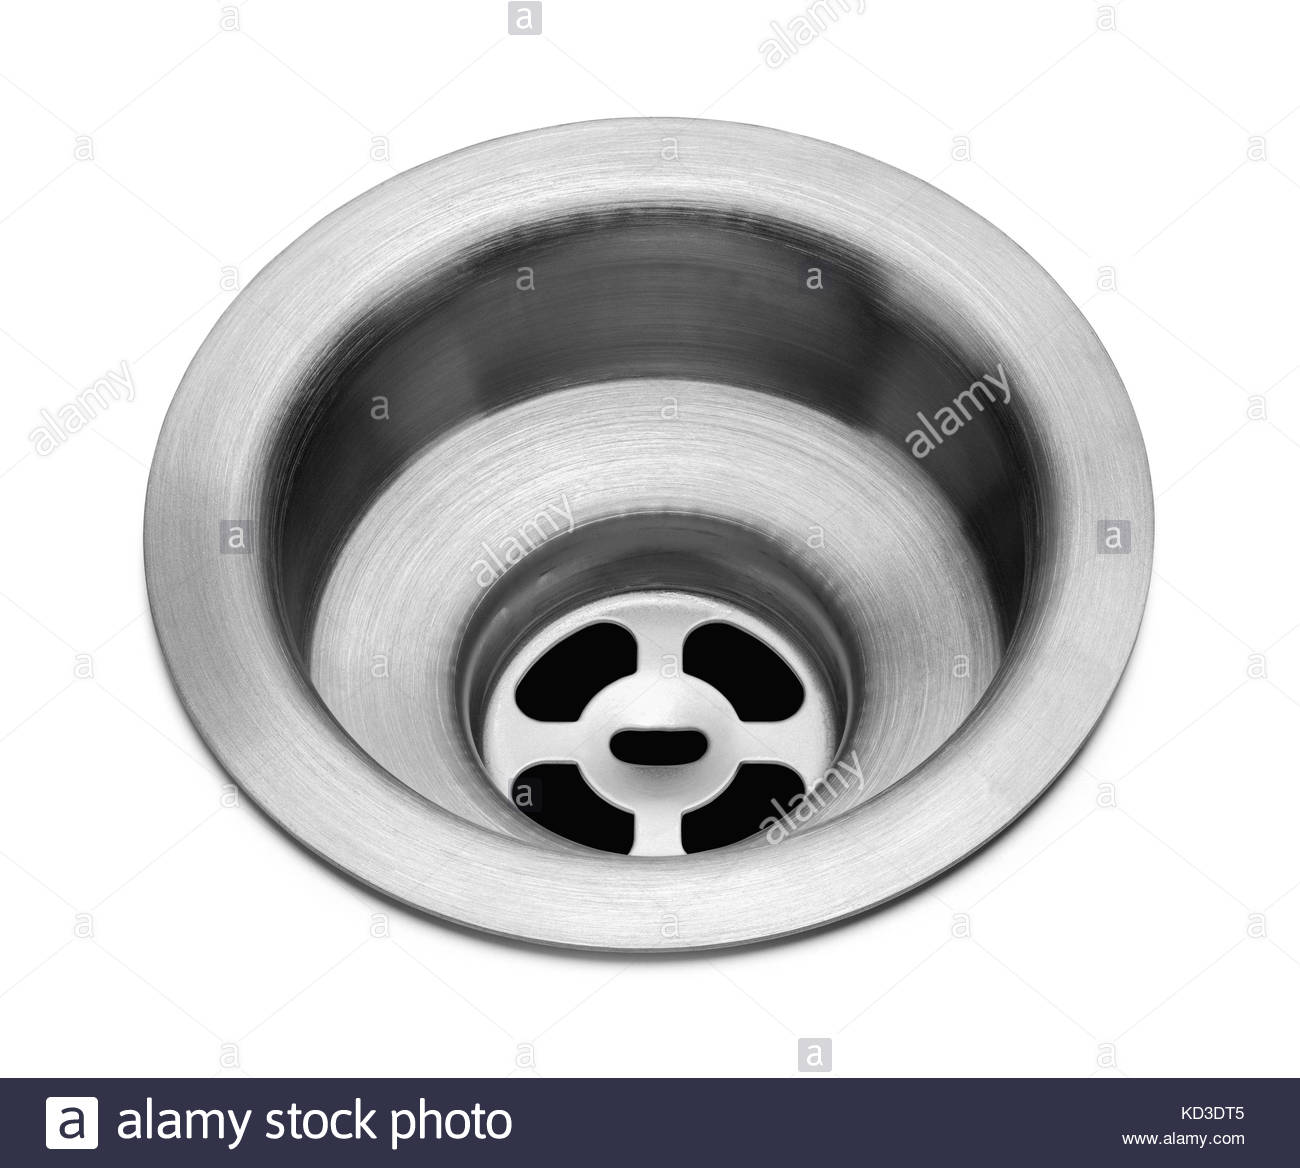 Metal Kitchen Sink Drain Isolated On White Background Stock Photo